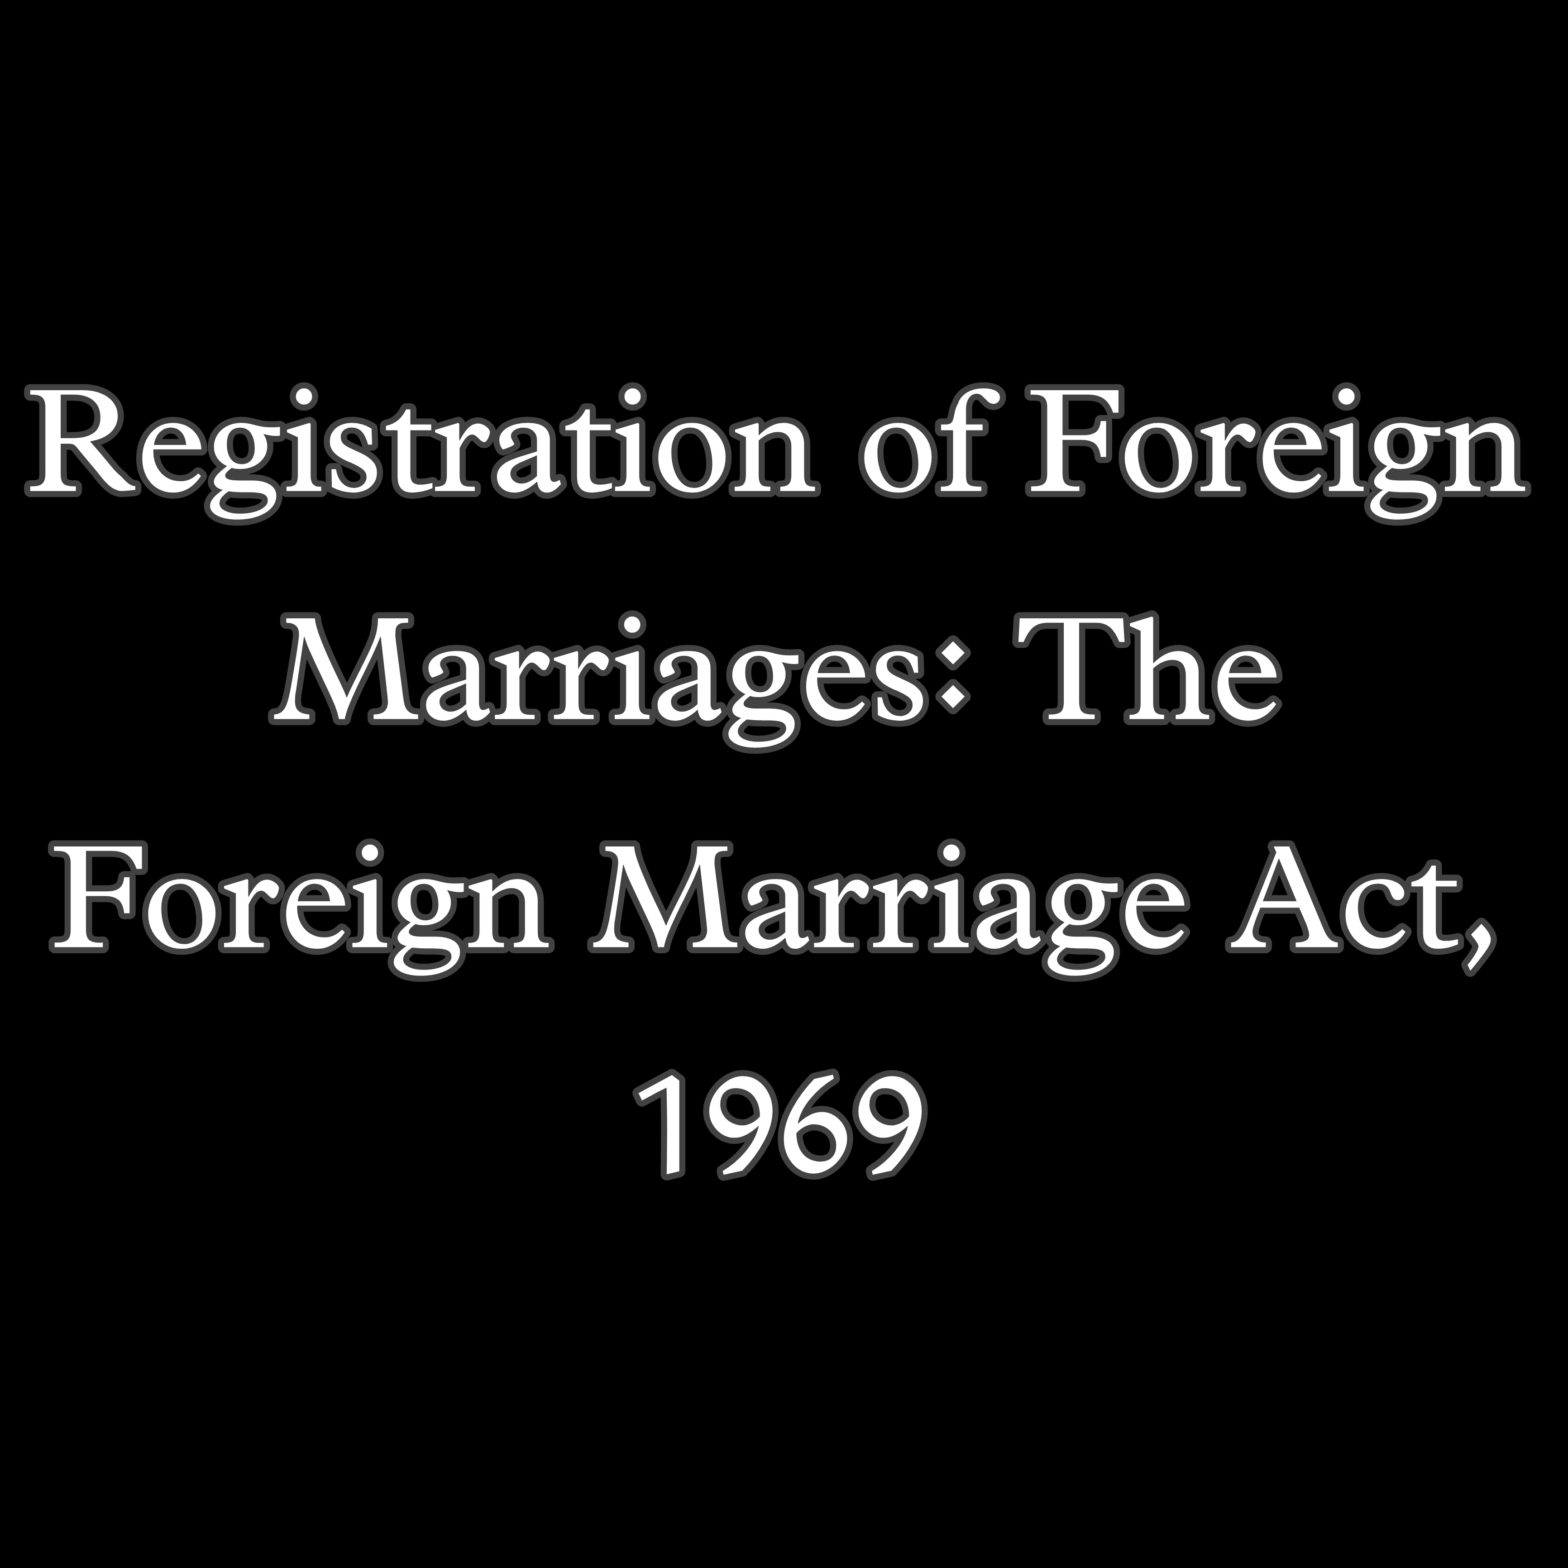 Registration of Foreign Marriages: The Foreign Marriage Act, 1969